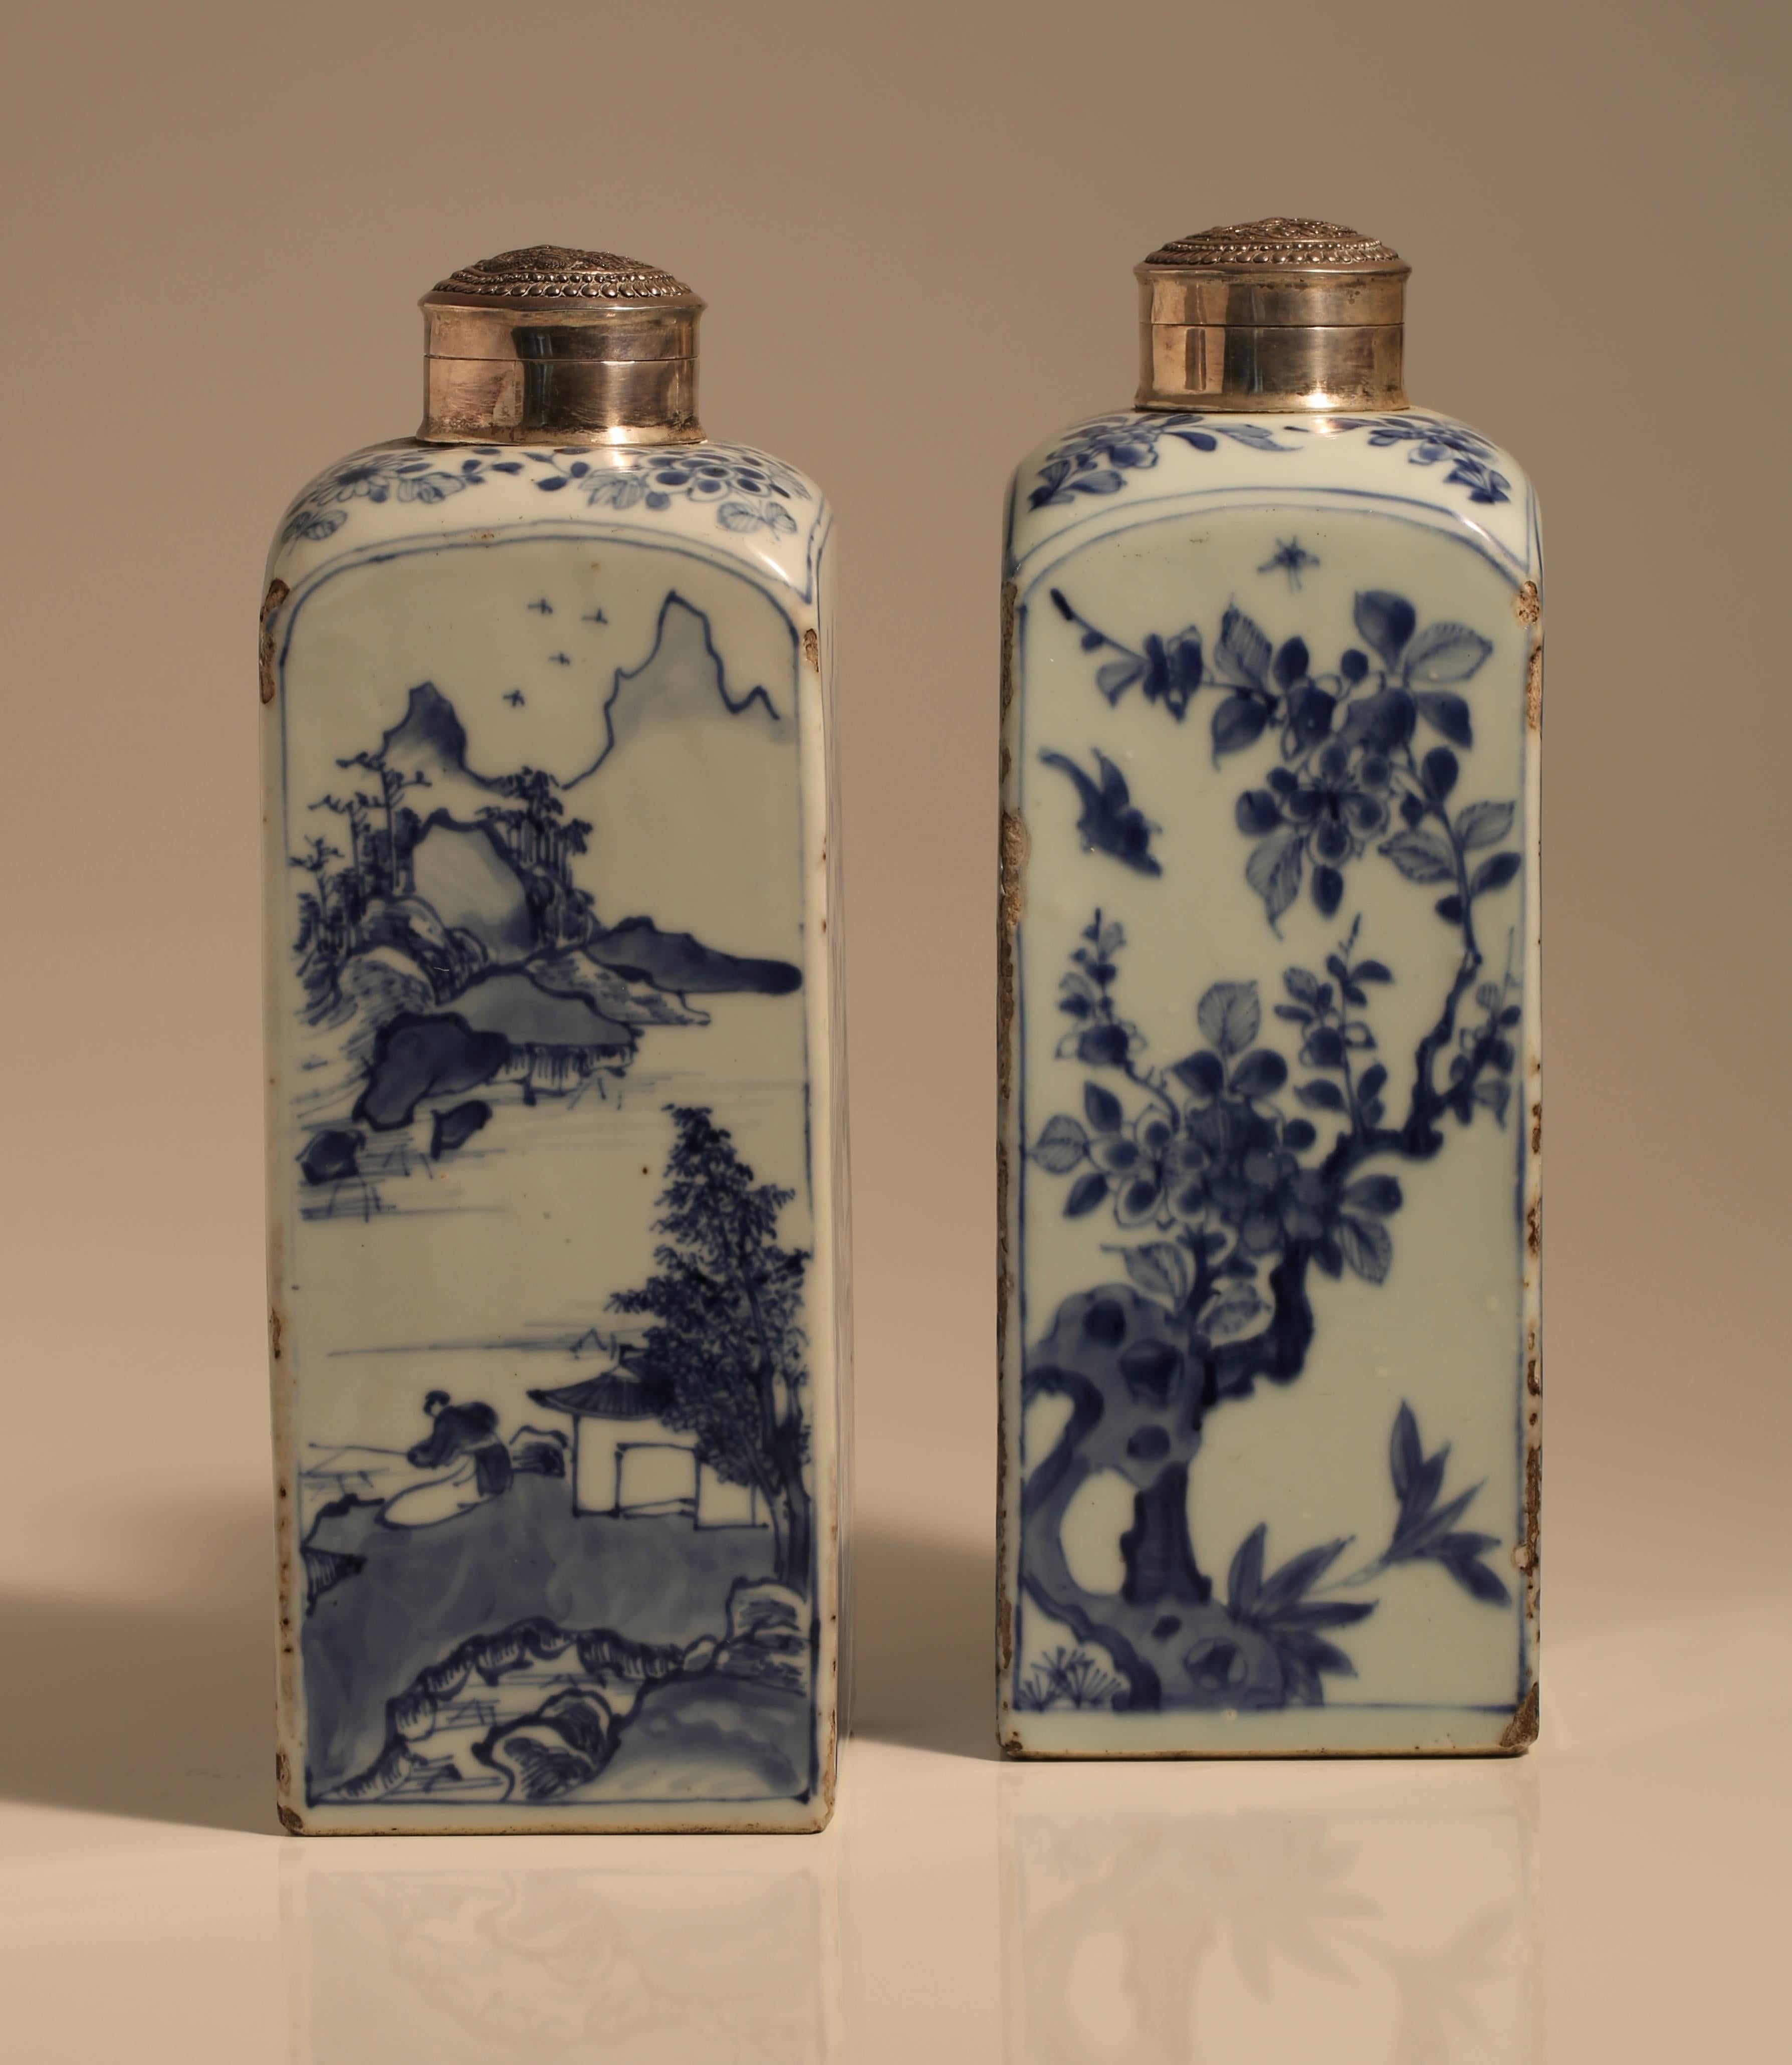 4285, fine pair of mid-17th century transitional Chinese blue and white porcelain gin bottles with later silver lids. Each face alternately decorated with figures in a landscape and then birds and insects in foliage. The bases unglazed, minor chips